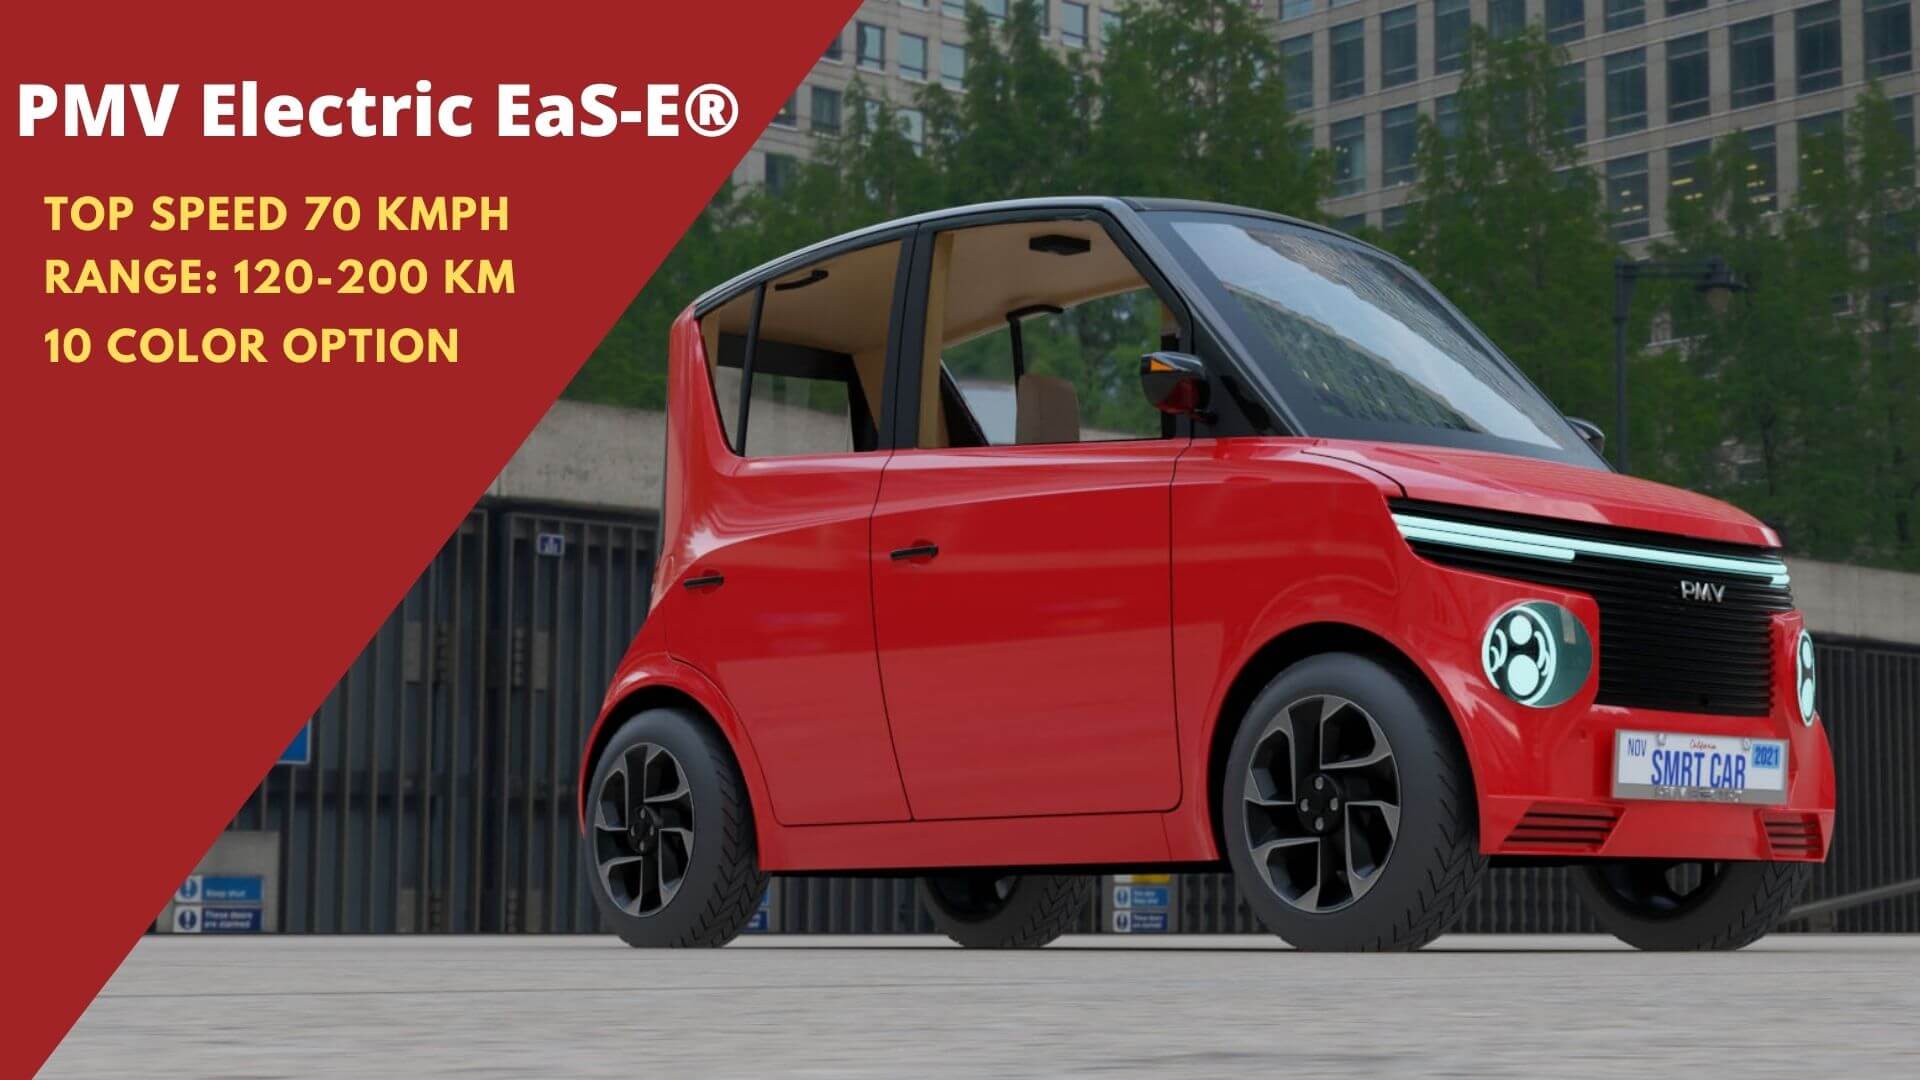 https://e-vehicleinfo.com/pmv-electric-car-price-and-launch-details/